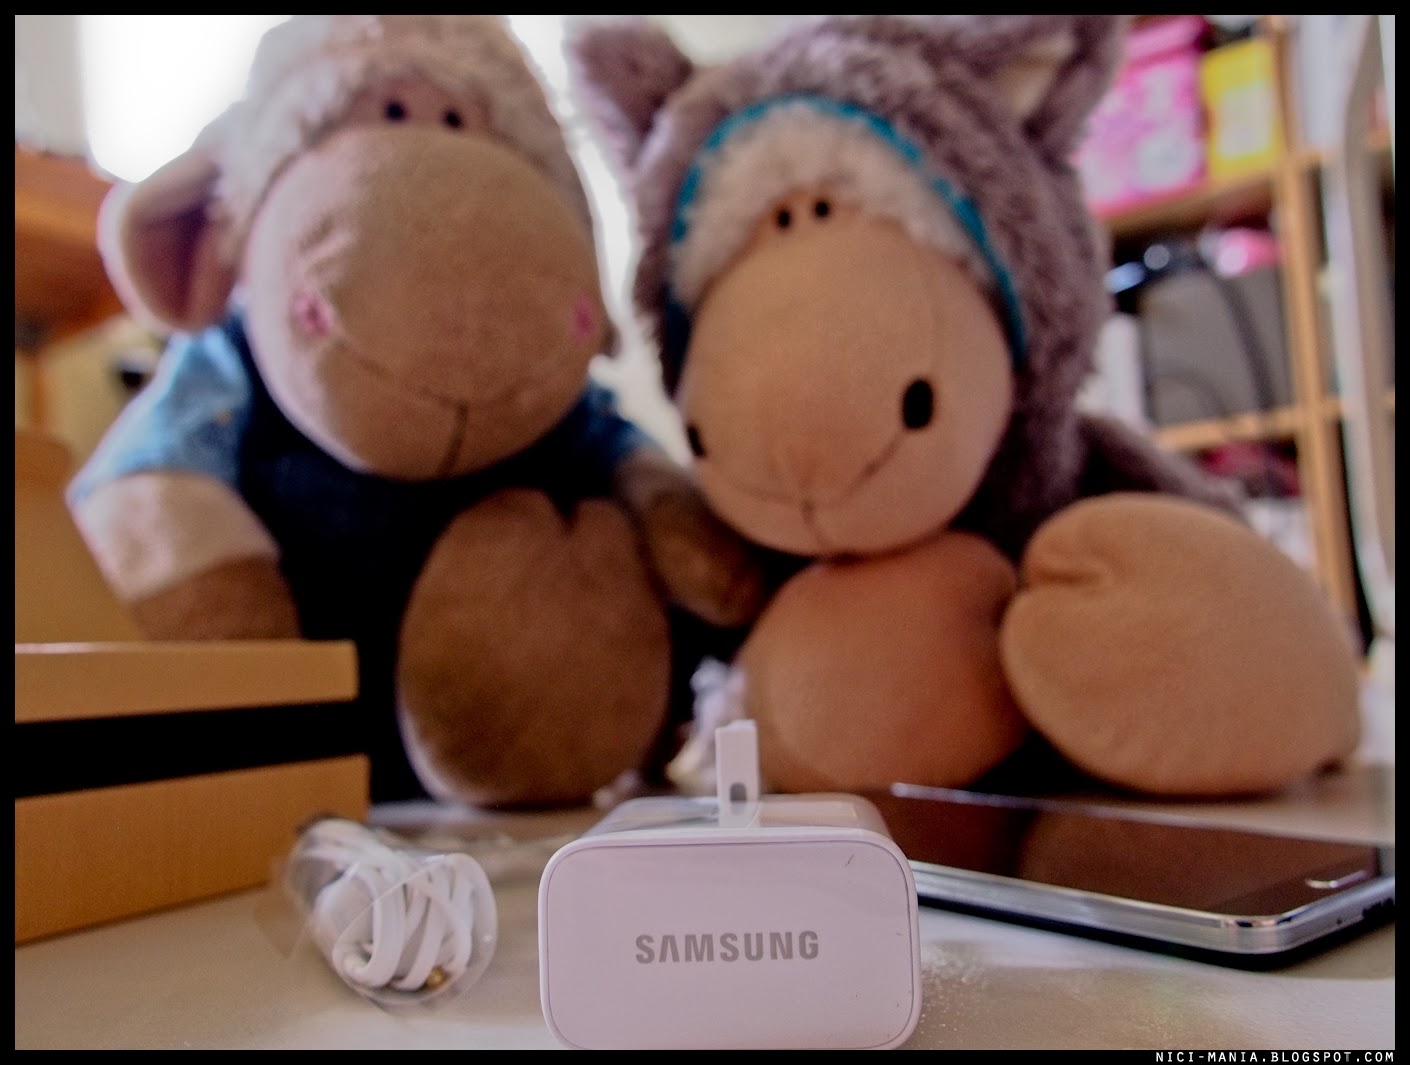 We noticed an interesting thing with the Galaxy Note 3 battery charger ...